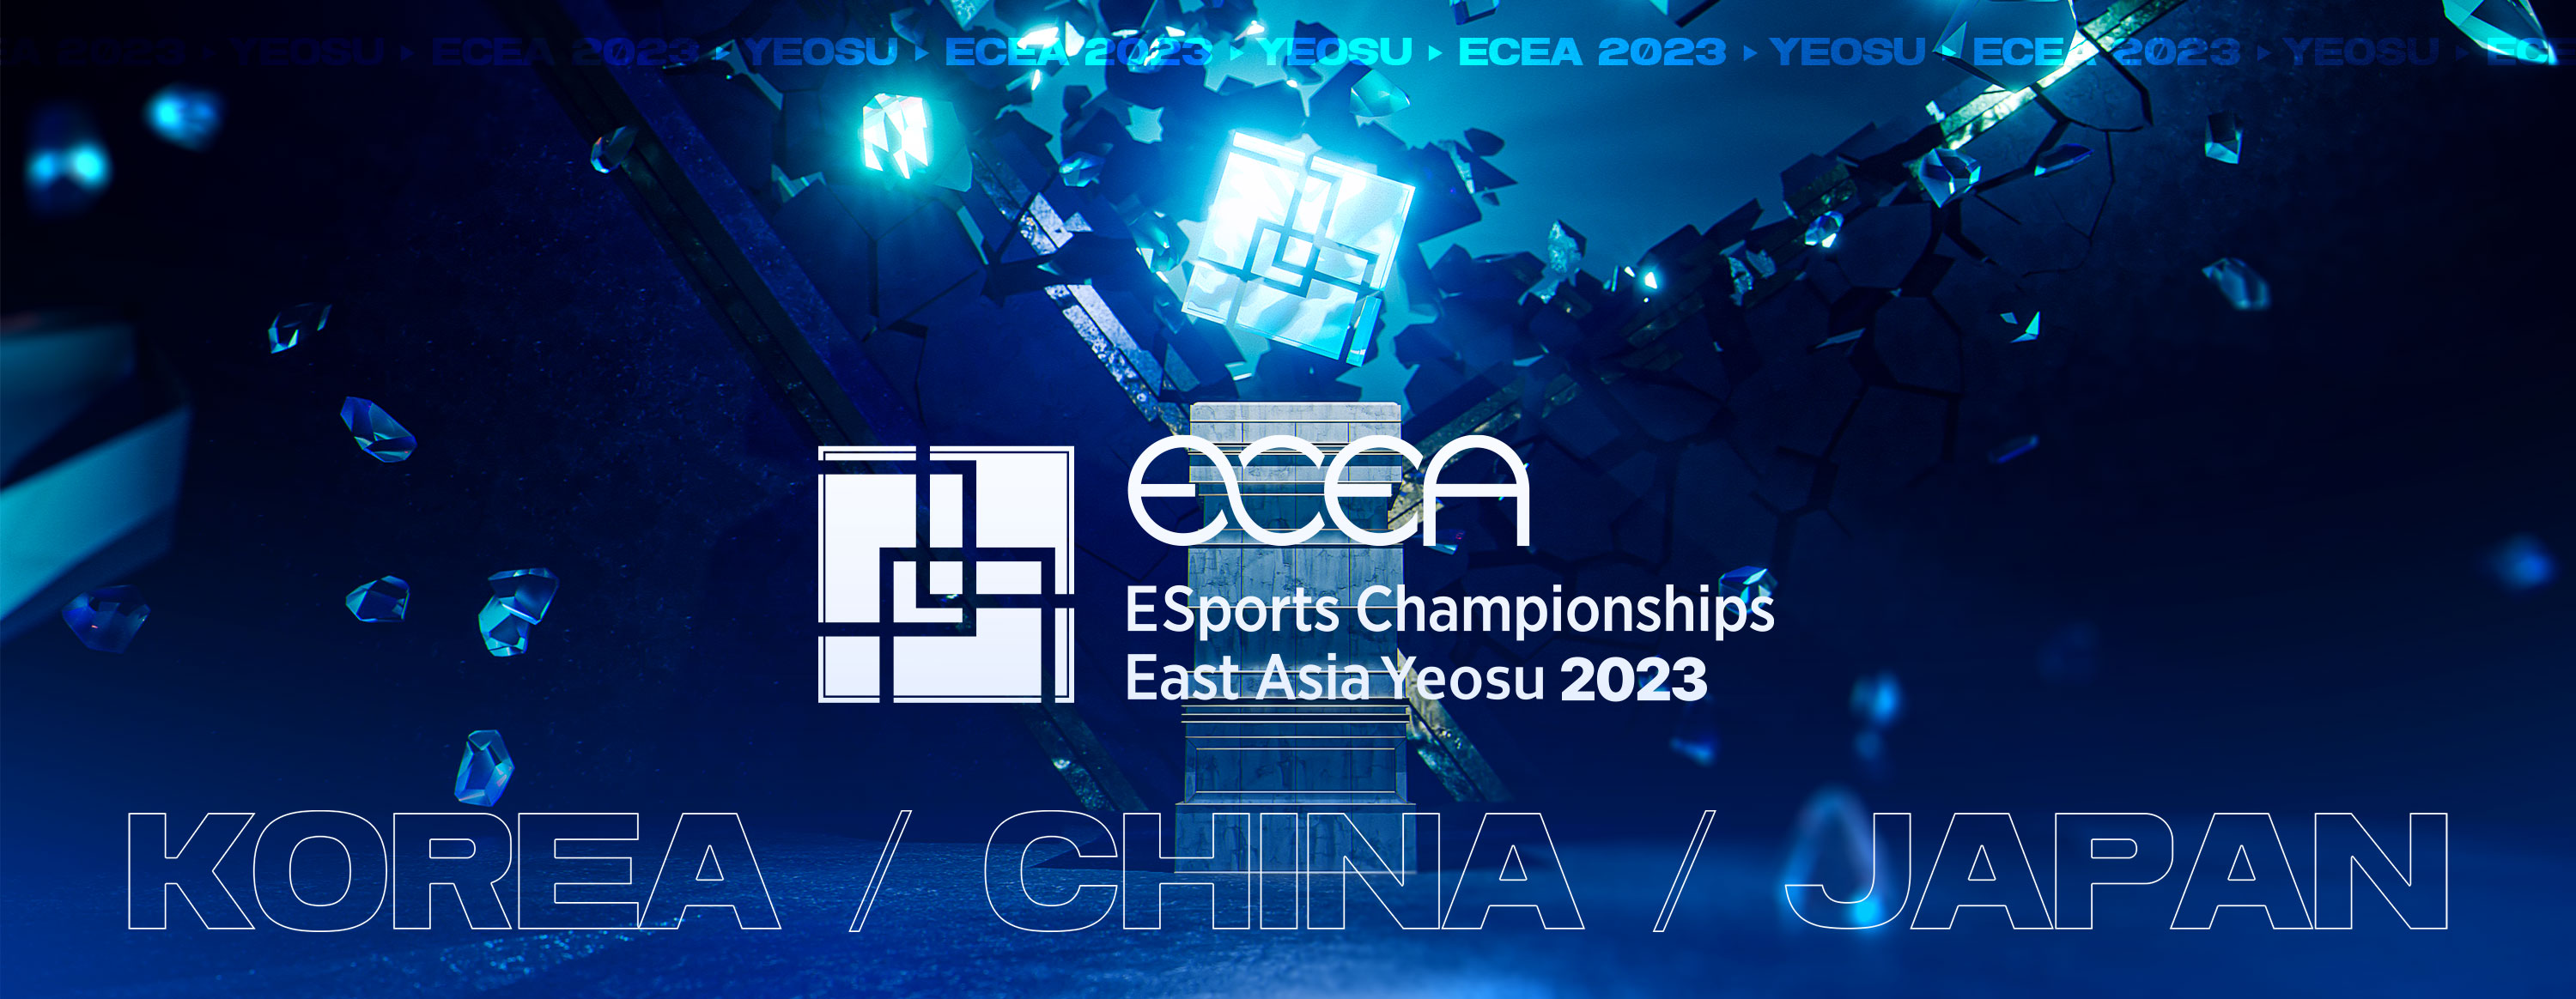 Esports Championships East Asia 2023